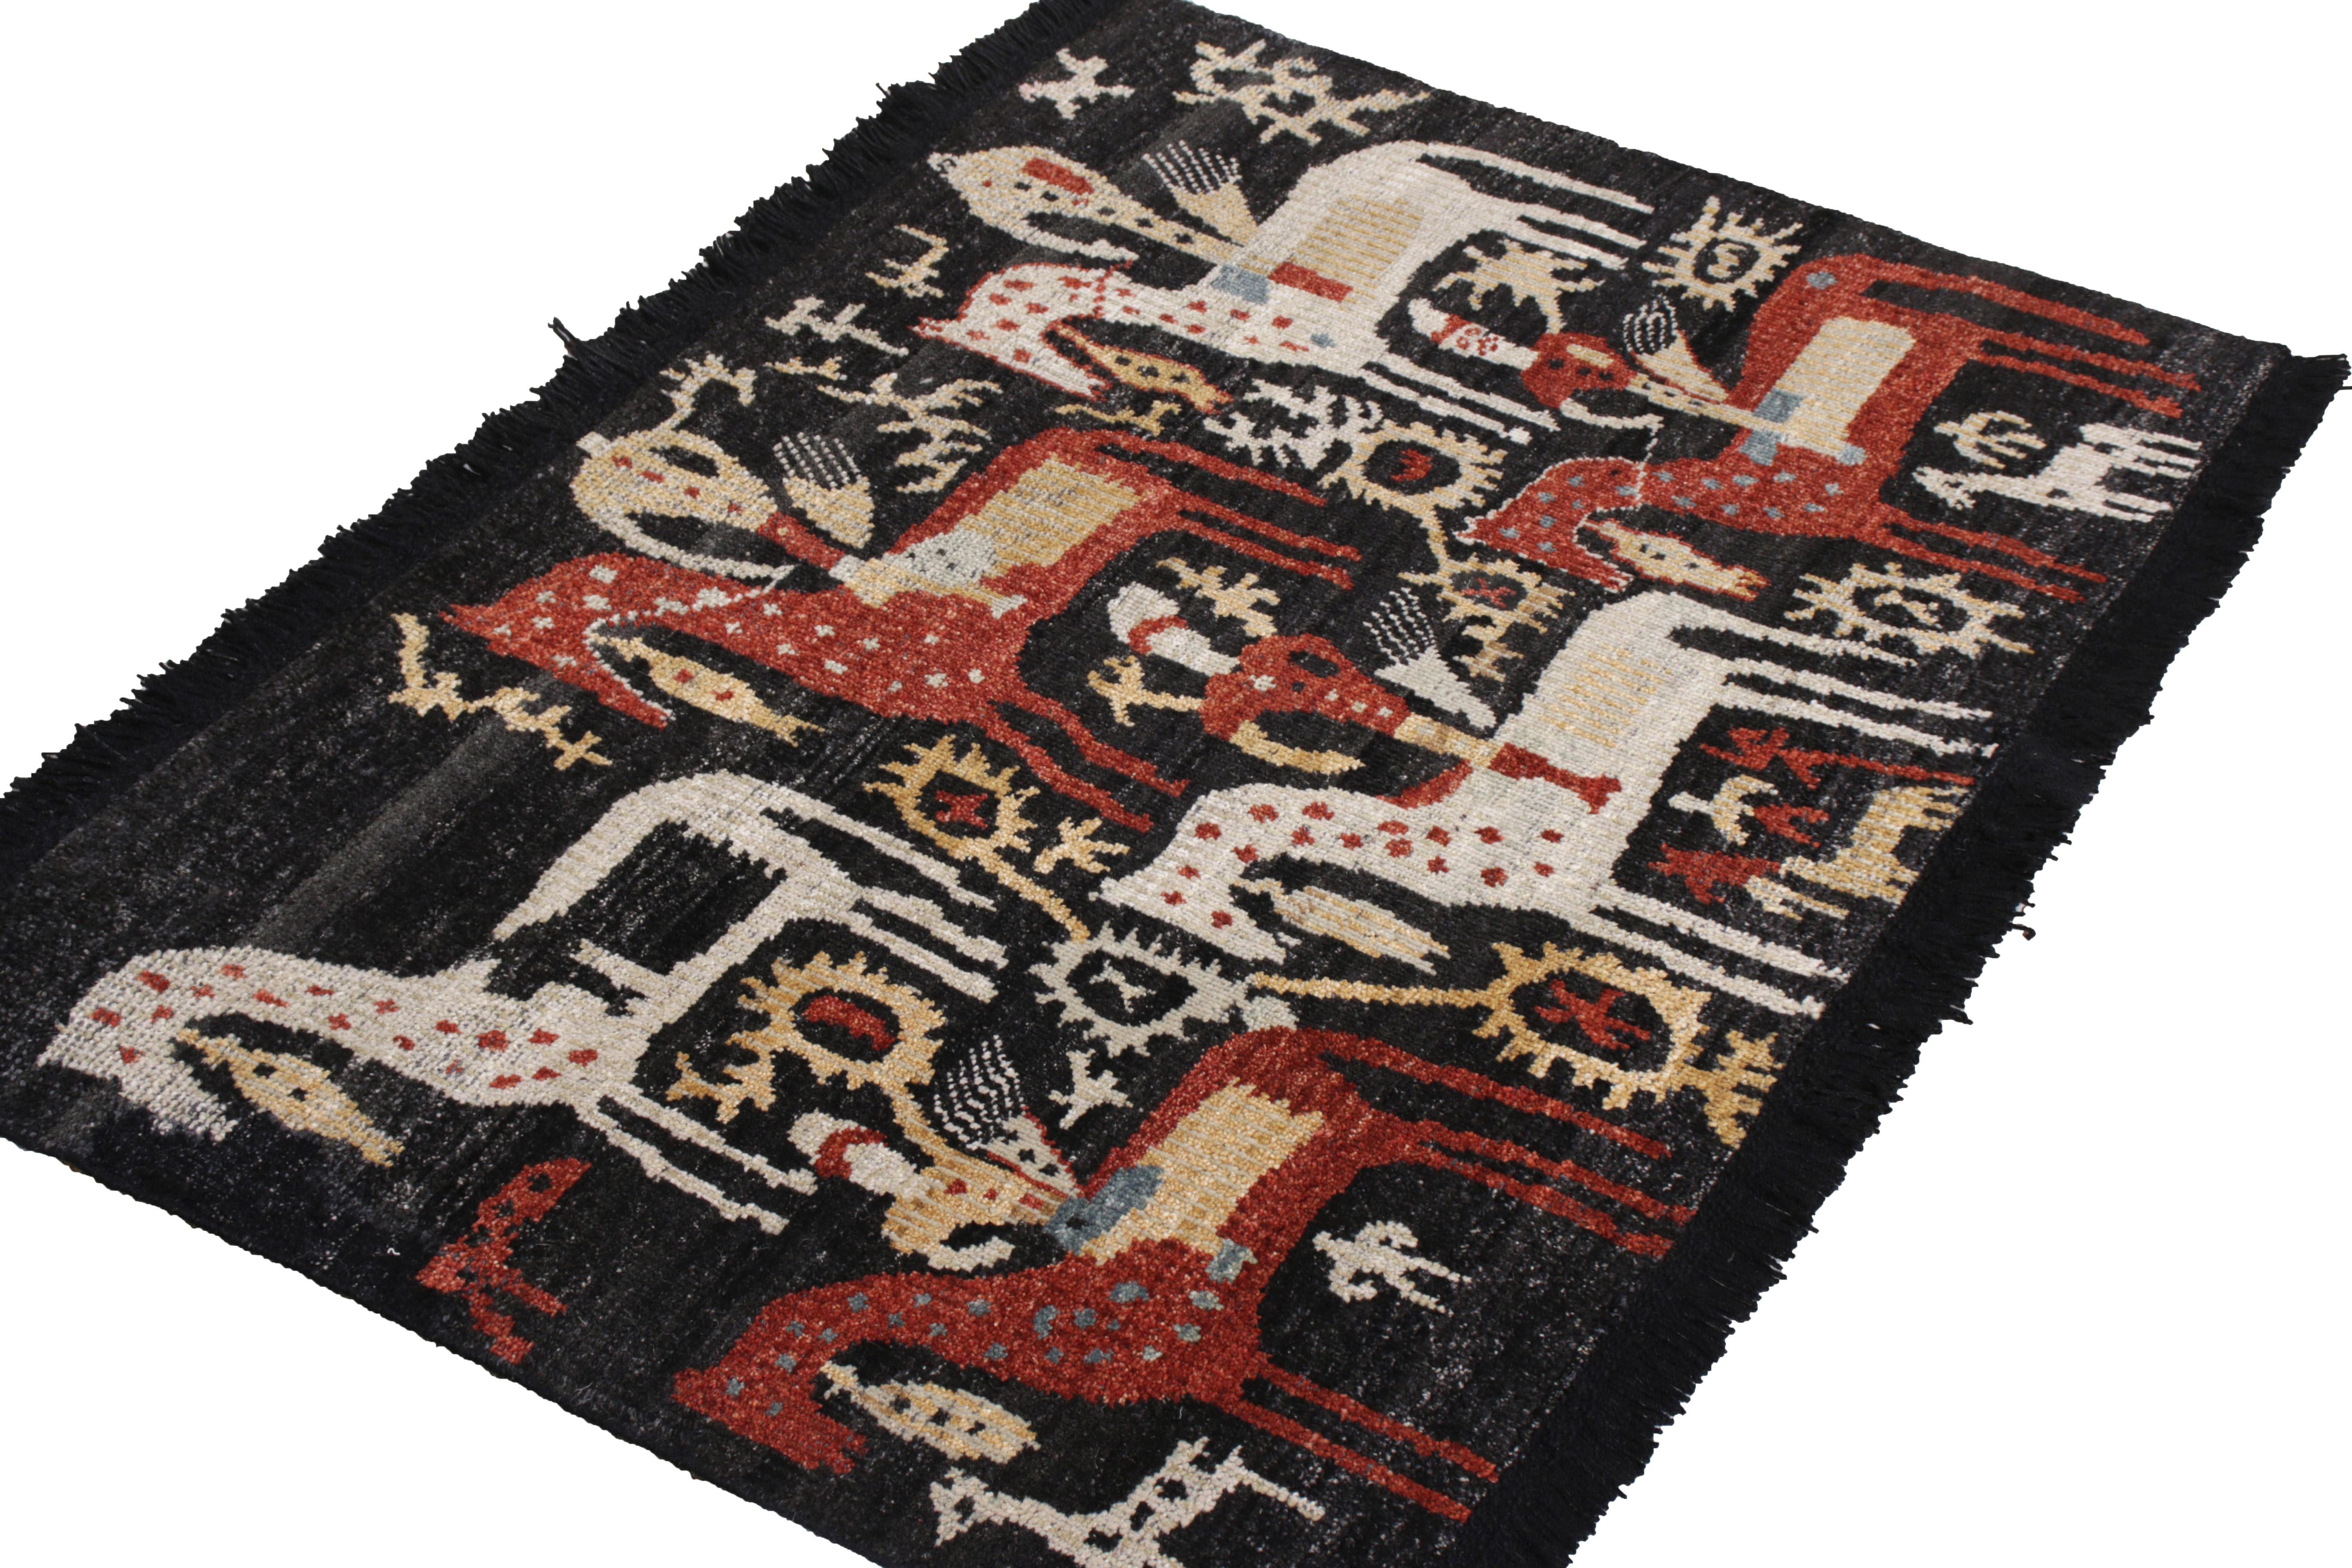 This 3 x 4 pictorial rug design represents custom rugs available from the Burano collection by Rug & Kilim, a custom classics collection hand knotted in a notably soft Ghazni Wool. This Classic rug pattern in red, white, and black can be made in our